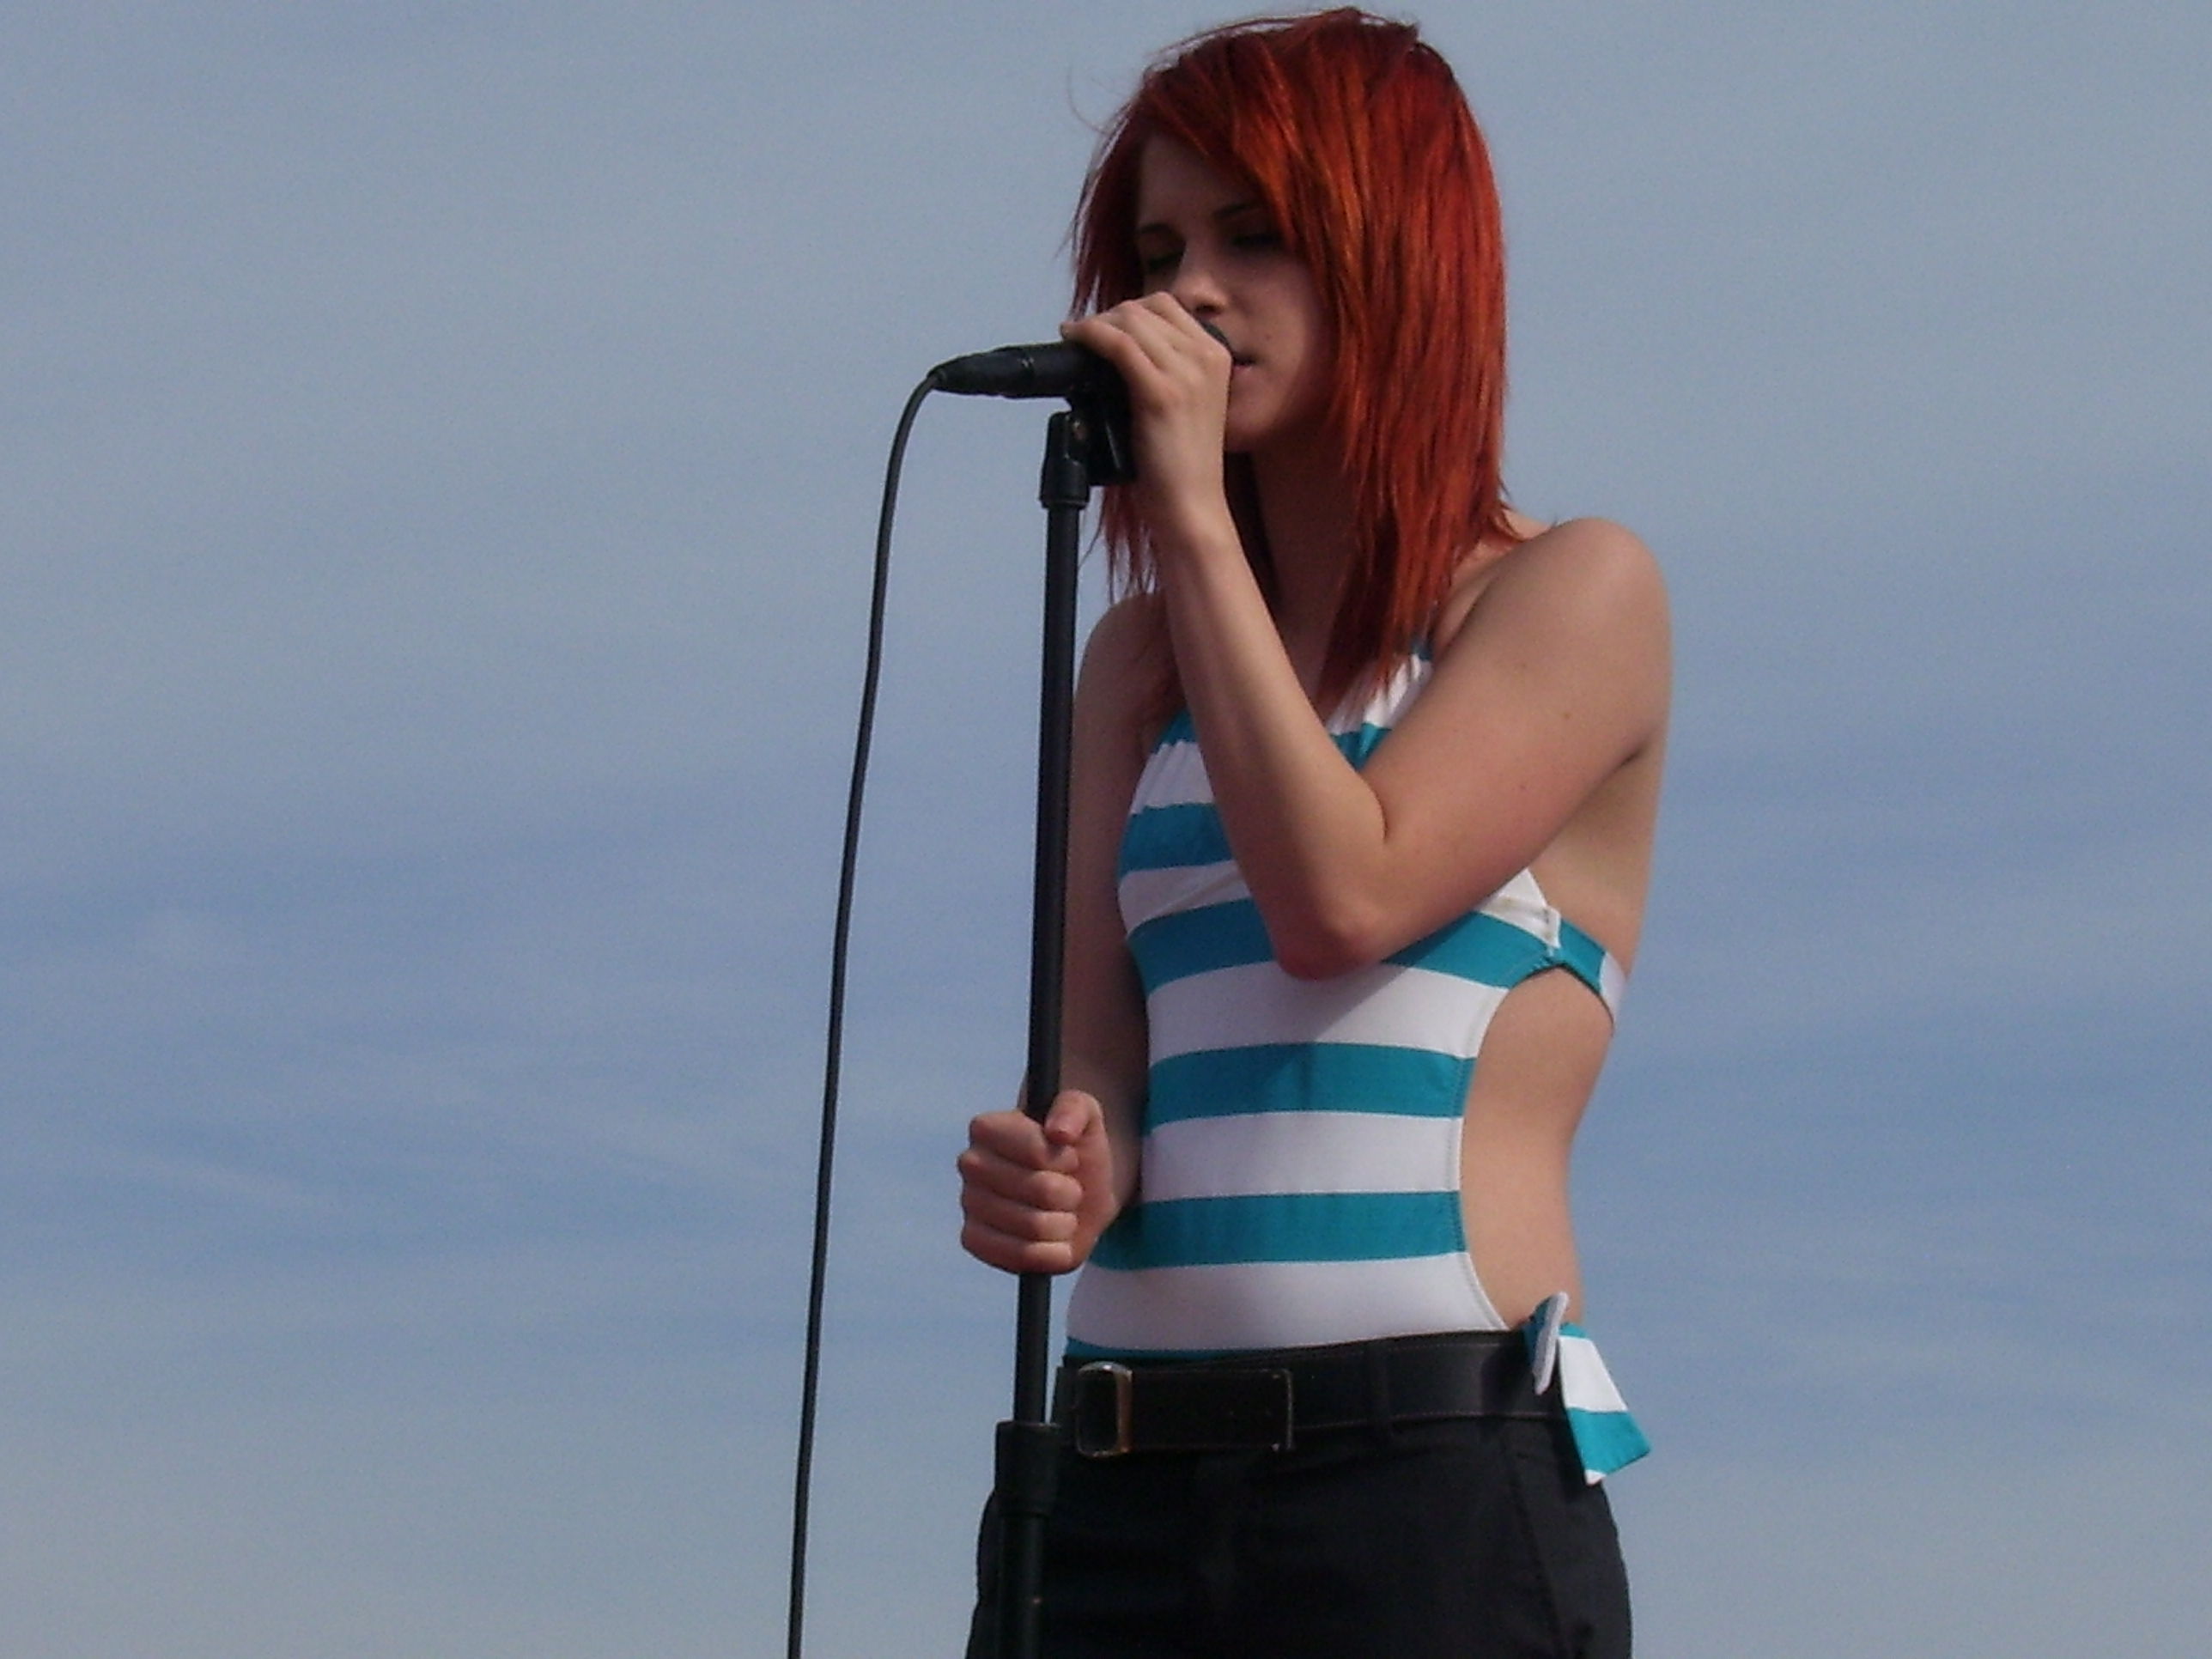 Music Hayley Williams HD Wallpaper | Background Image